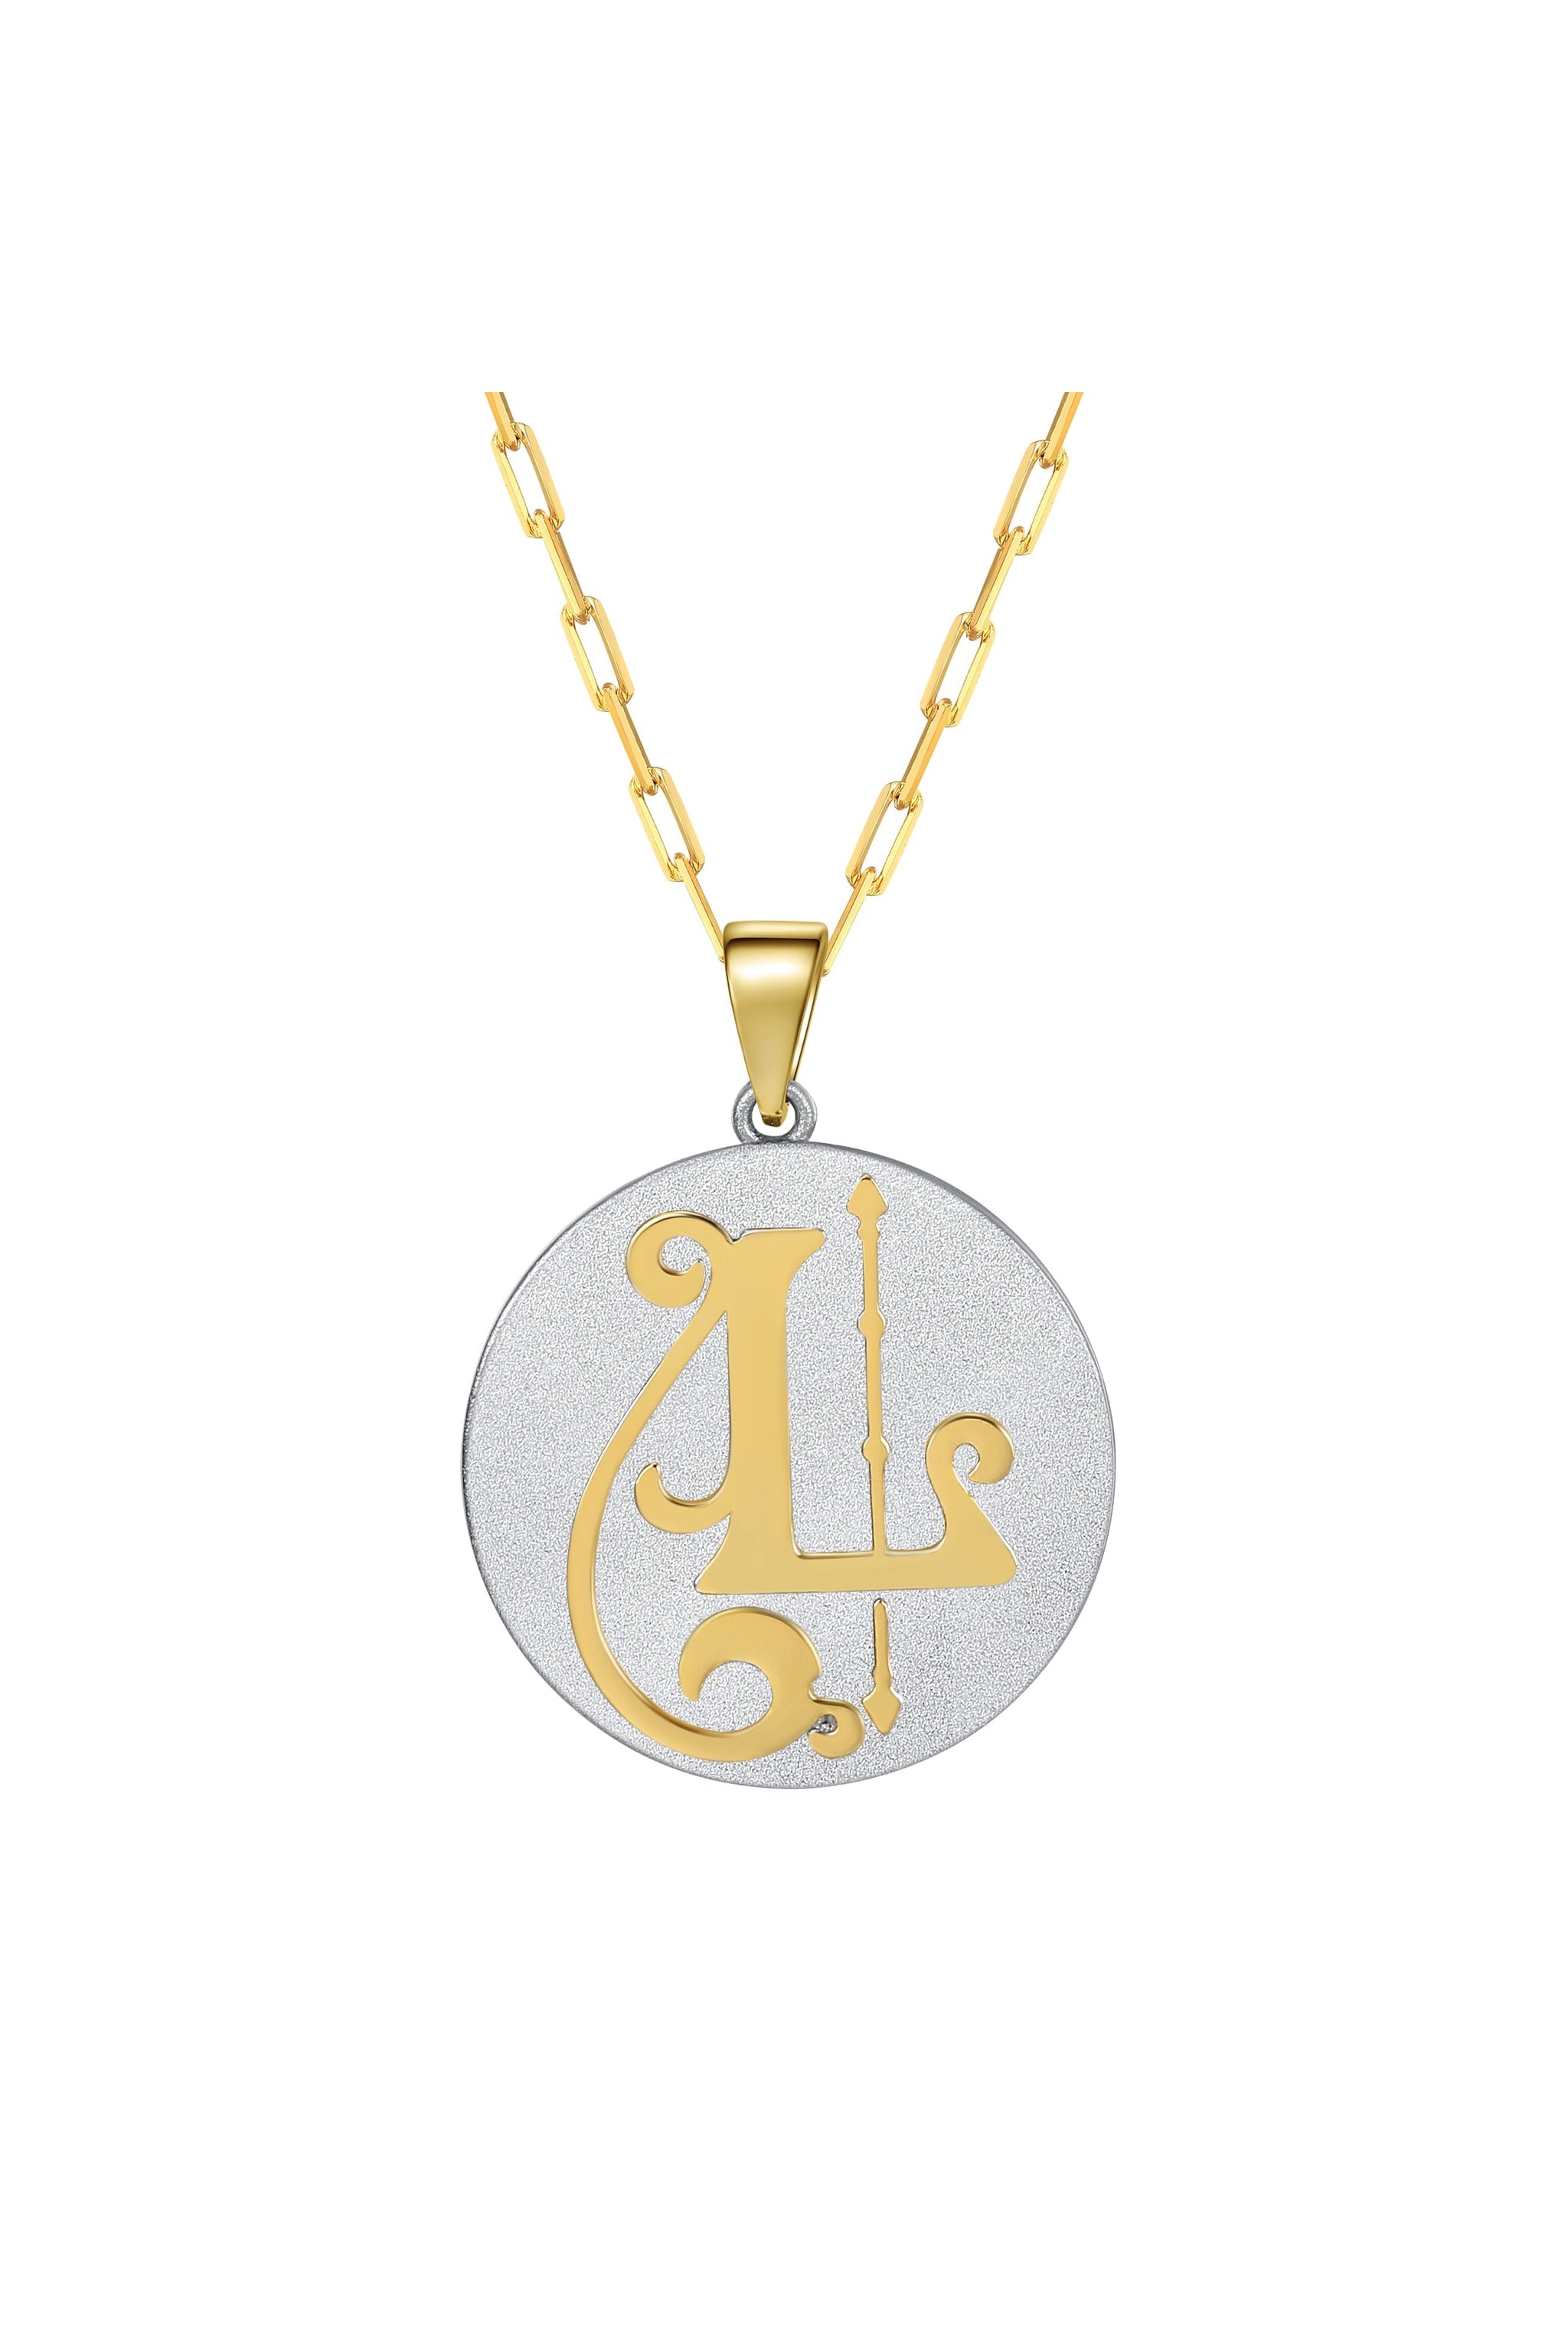 Yellow Gold Flashed Sterling Silver L Letter Initial Alphabet Name  Personalized 925 Silver Pendant Necklace | Pendant necklace, Silver pendant  necklace, Necklace